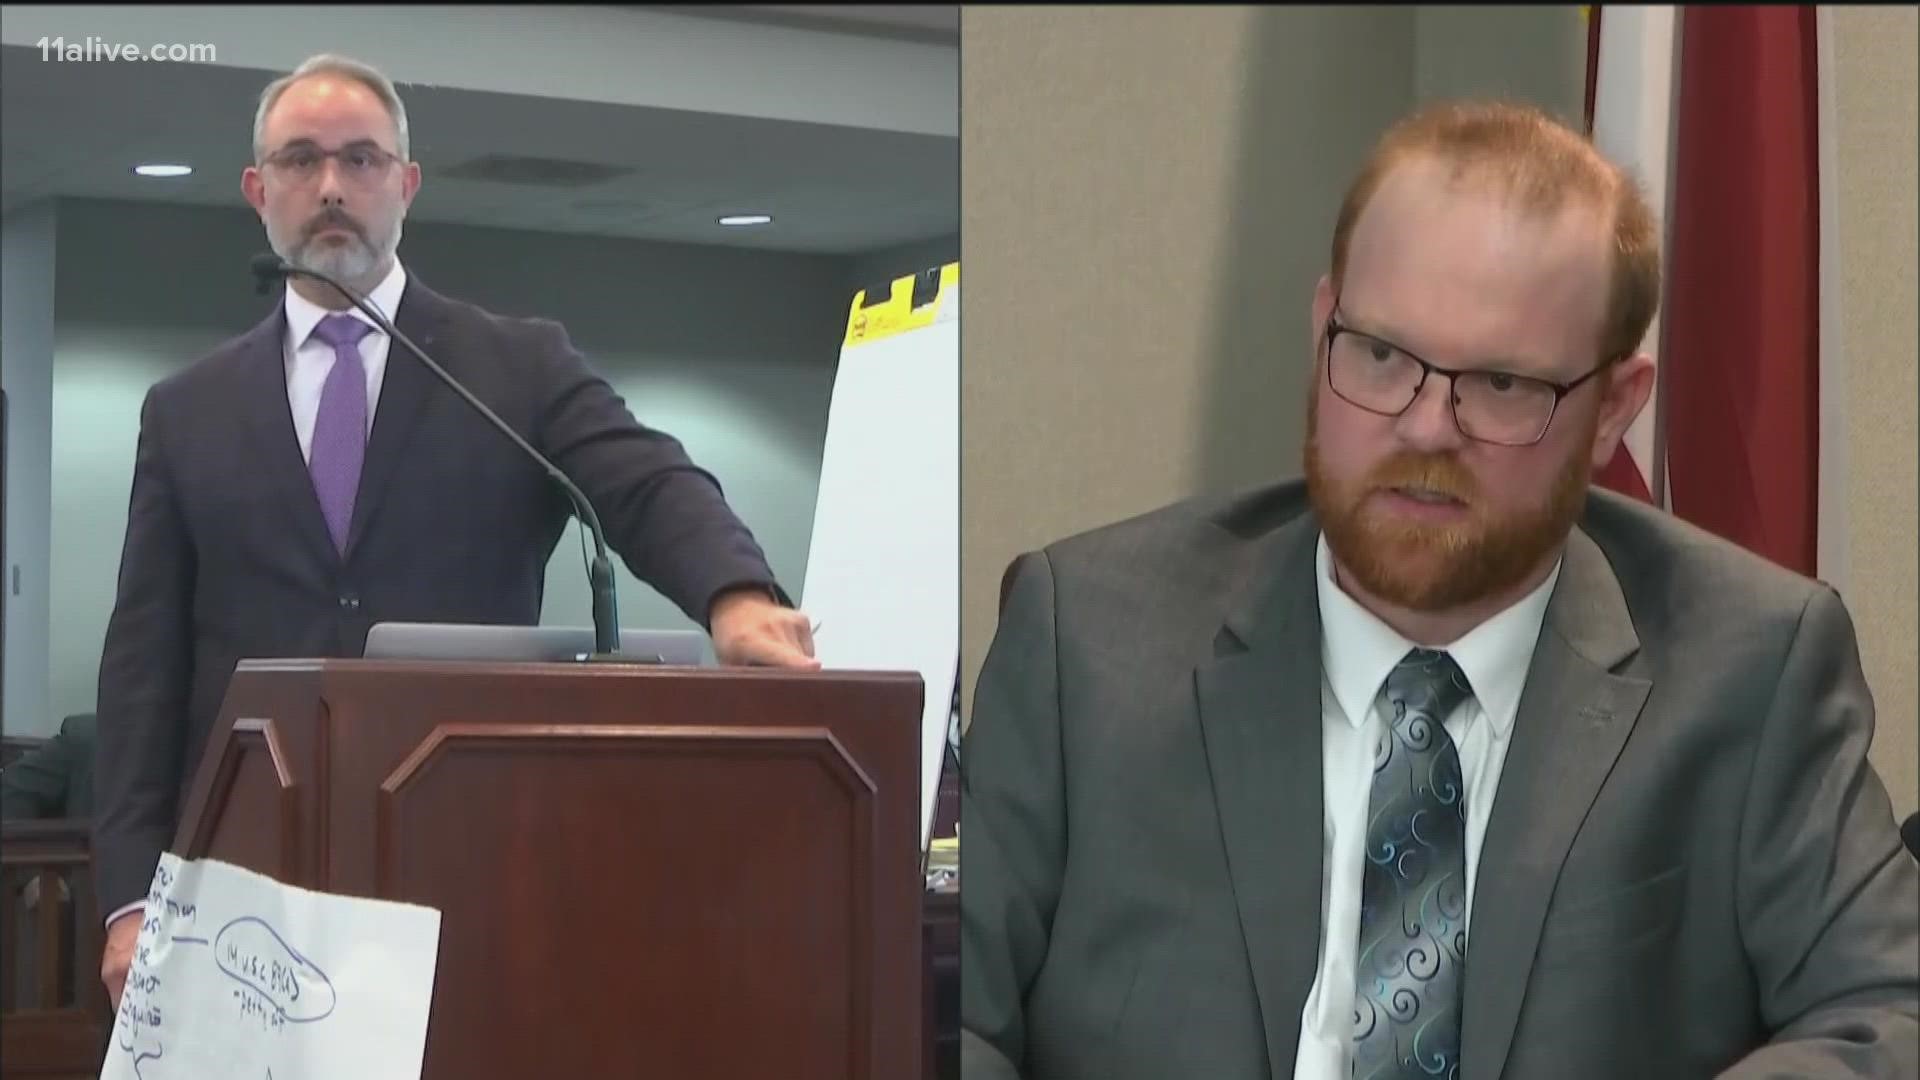 Travis McMichael takes the stand to testify in the death of Ahmaud Arbery murder trial on Nov. 17, 2021. He spoke on what he heard about the home.